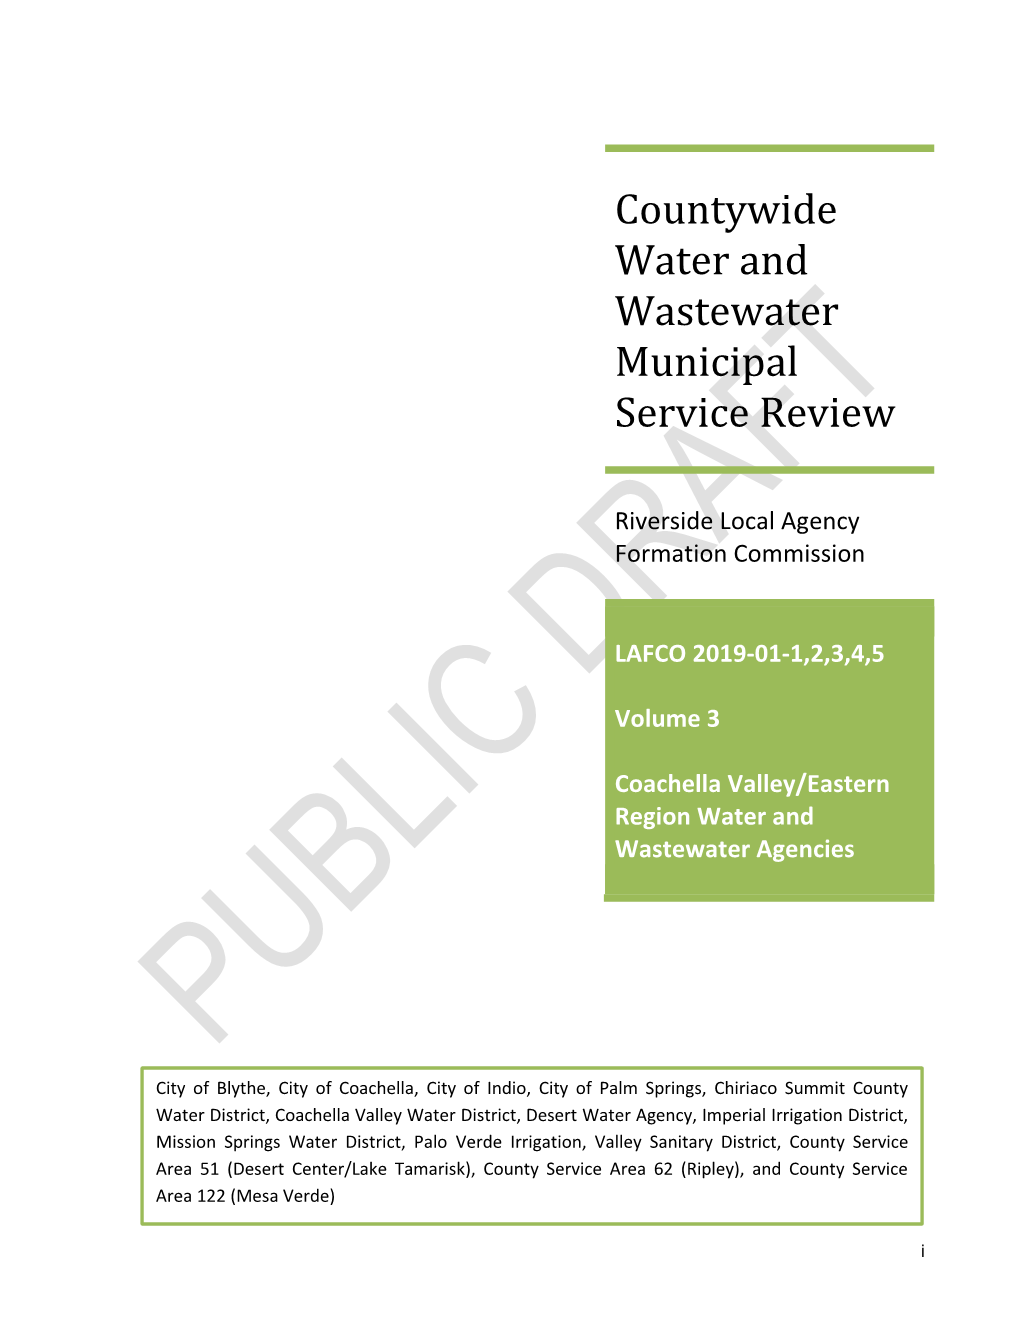 Countywide Water and Wastewater Municipal Service Review